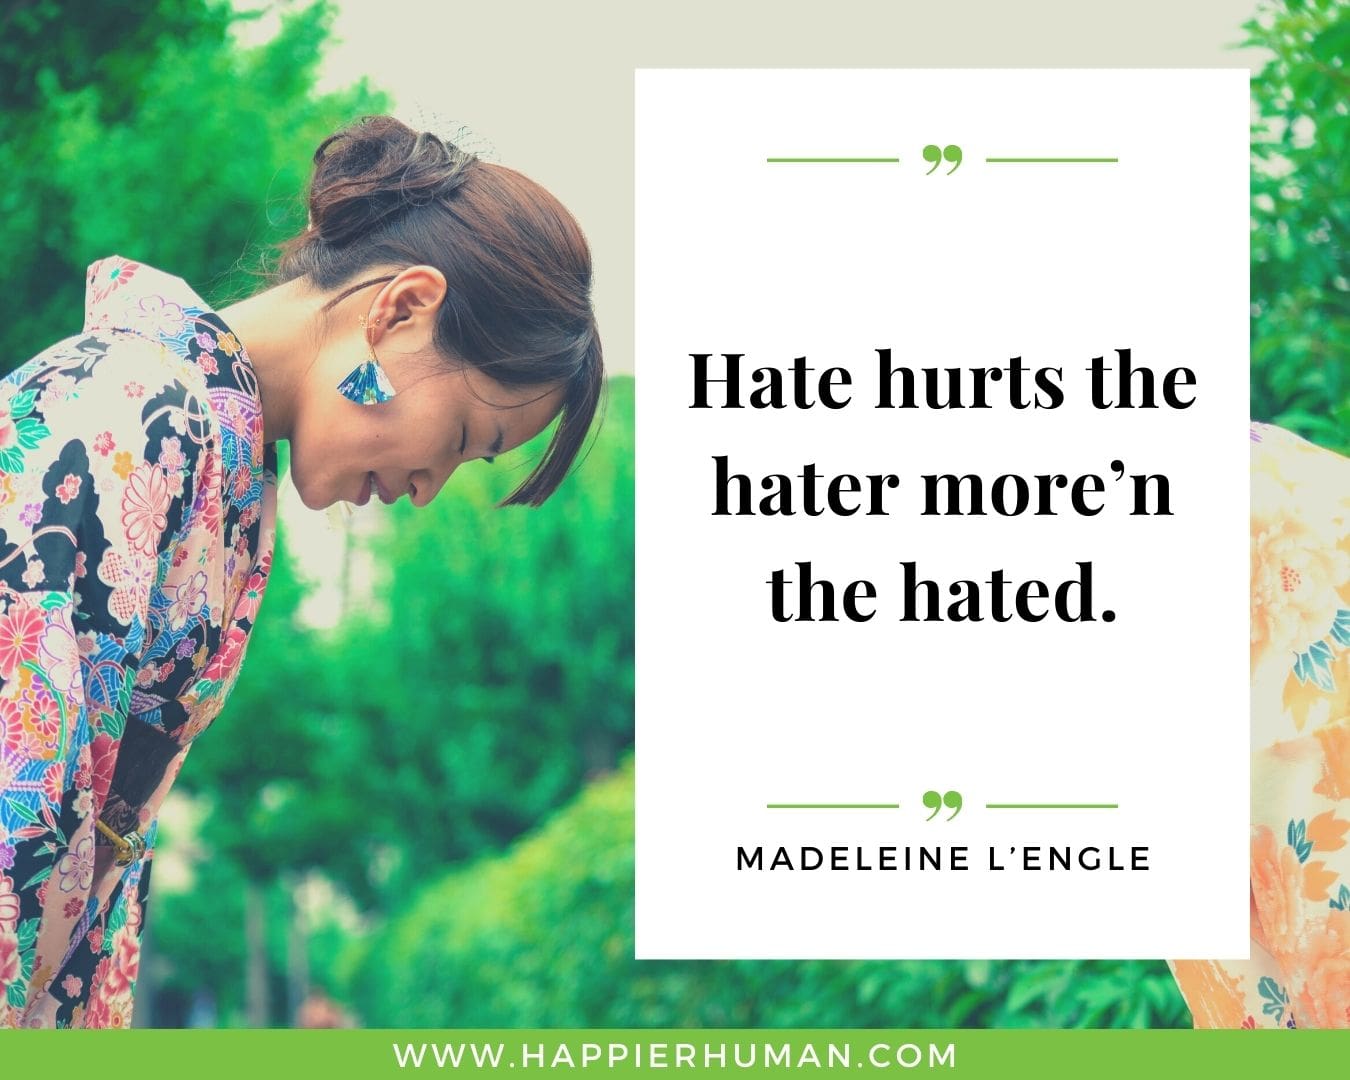 Haters Quotes - “Hate hurts the hater more’n the hated.“ - Madeleine L’Engle